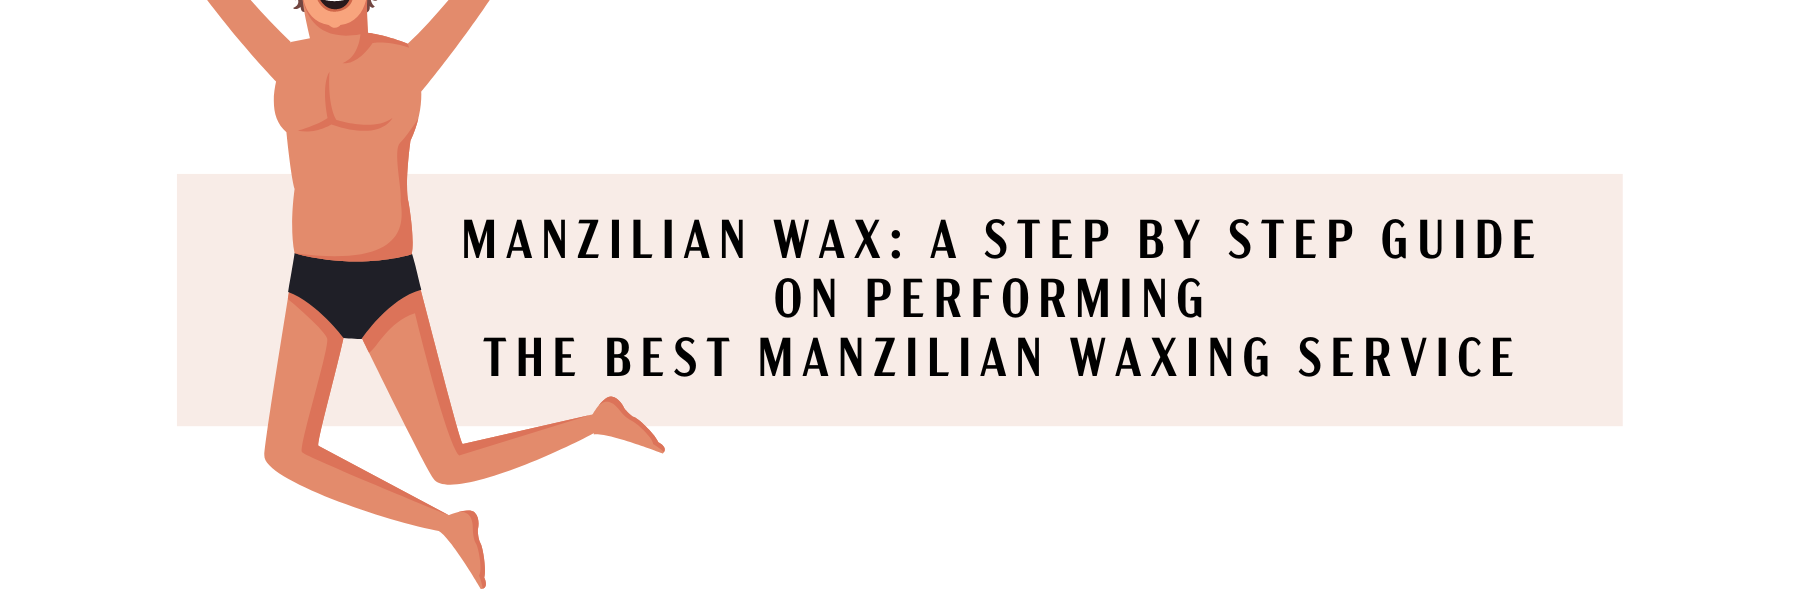 Manzilian Wax A Step by Step Guide on Performing the Best Manzilian Waxing Service